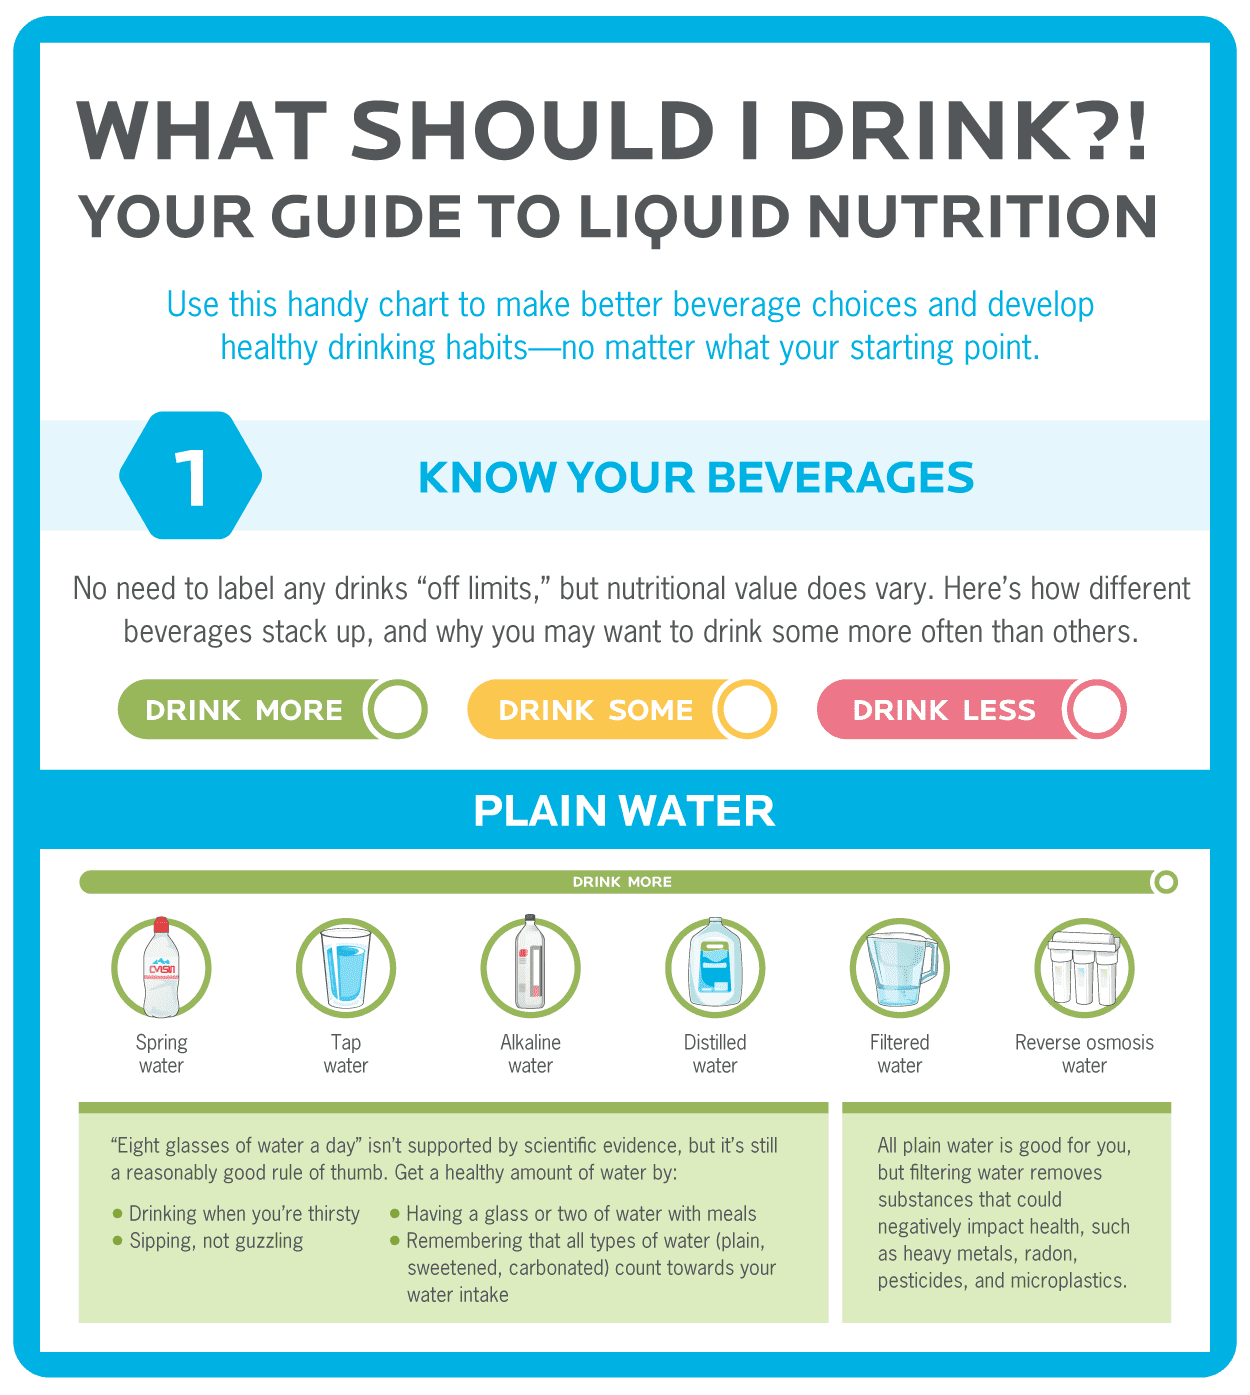 Image shows the cover of our "What should I drink?" infographic guide to liquid nutrition.